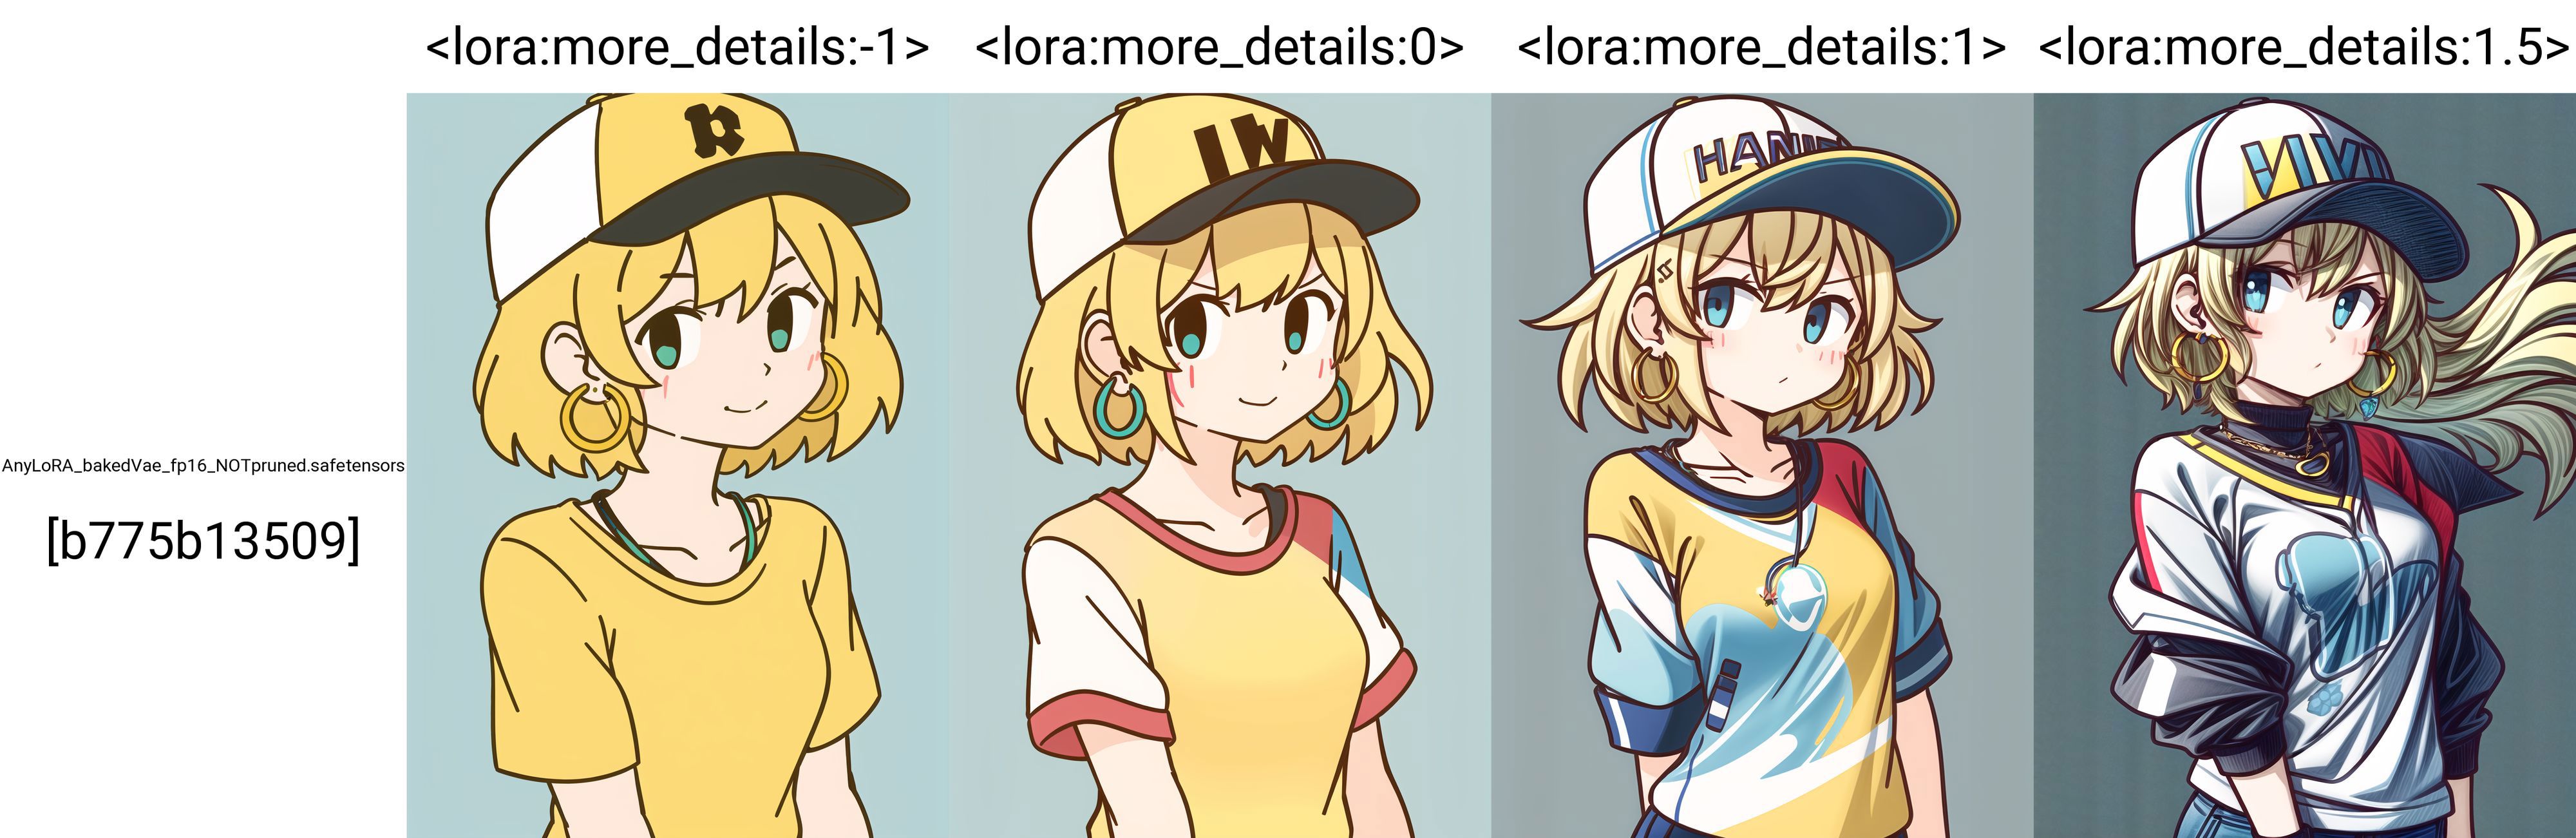 Three Illustrations of a Girl Wearing a Hat and Shirt.